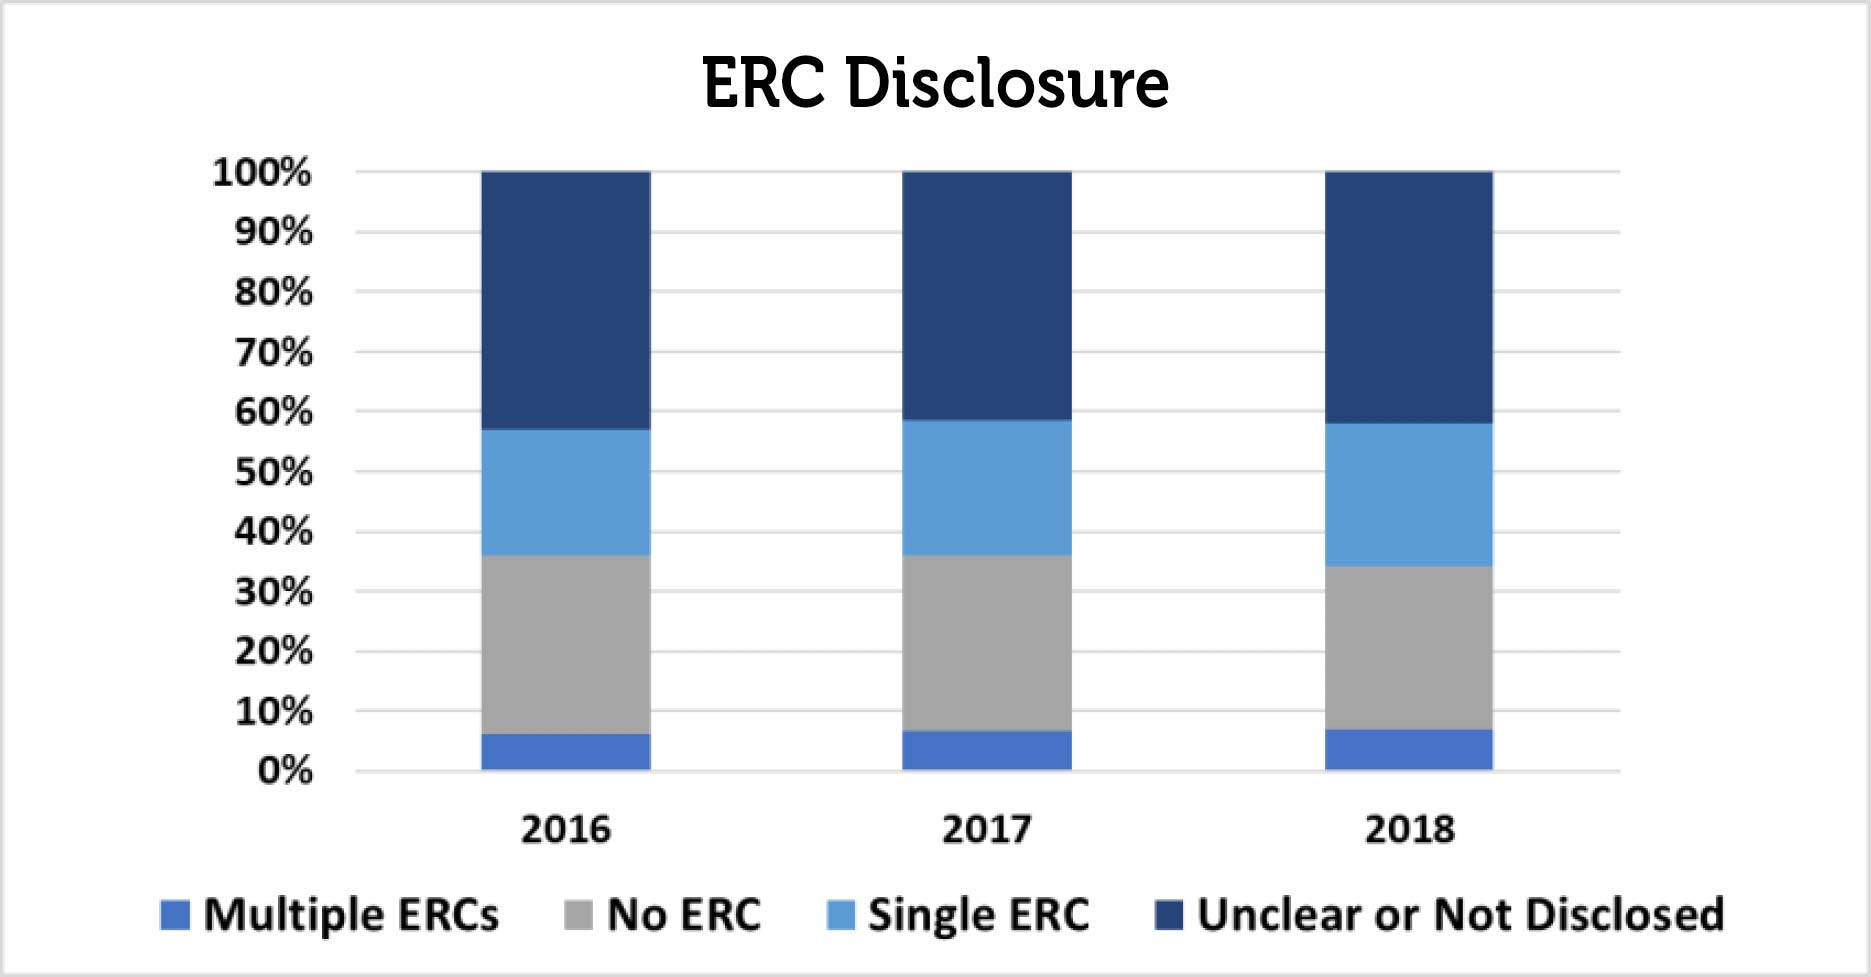 Sampling 694 listed companies, use of ERCs for KMP remuneration recommendations increased slightly over three years from 27% to 31%